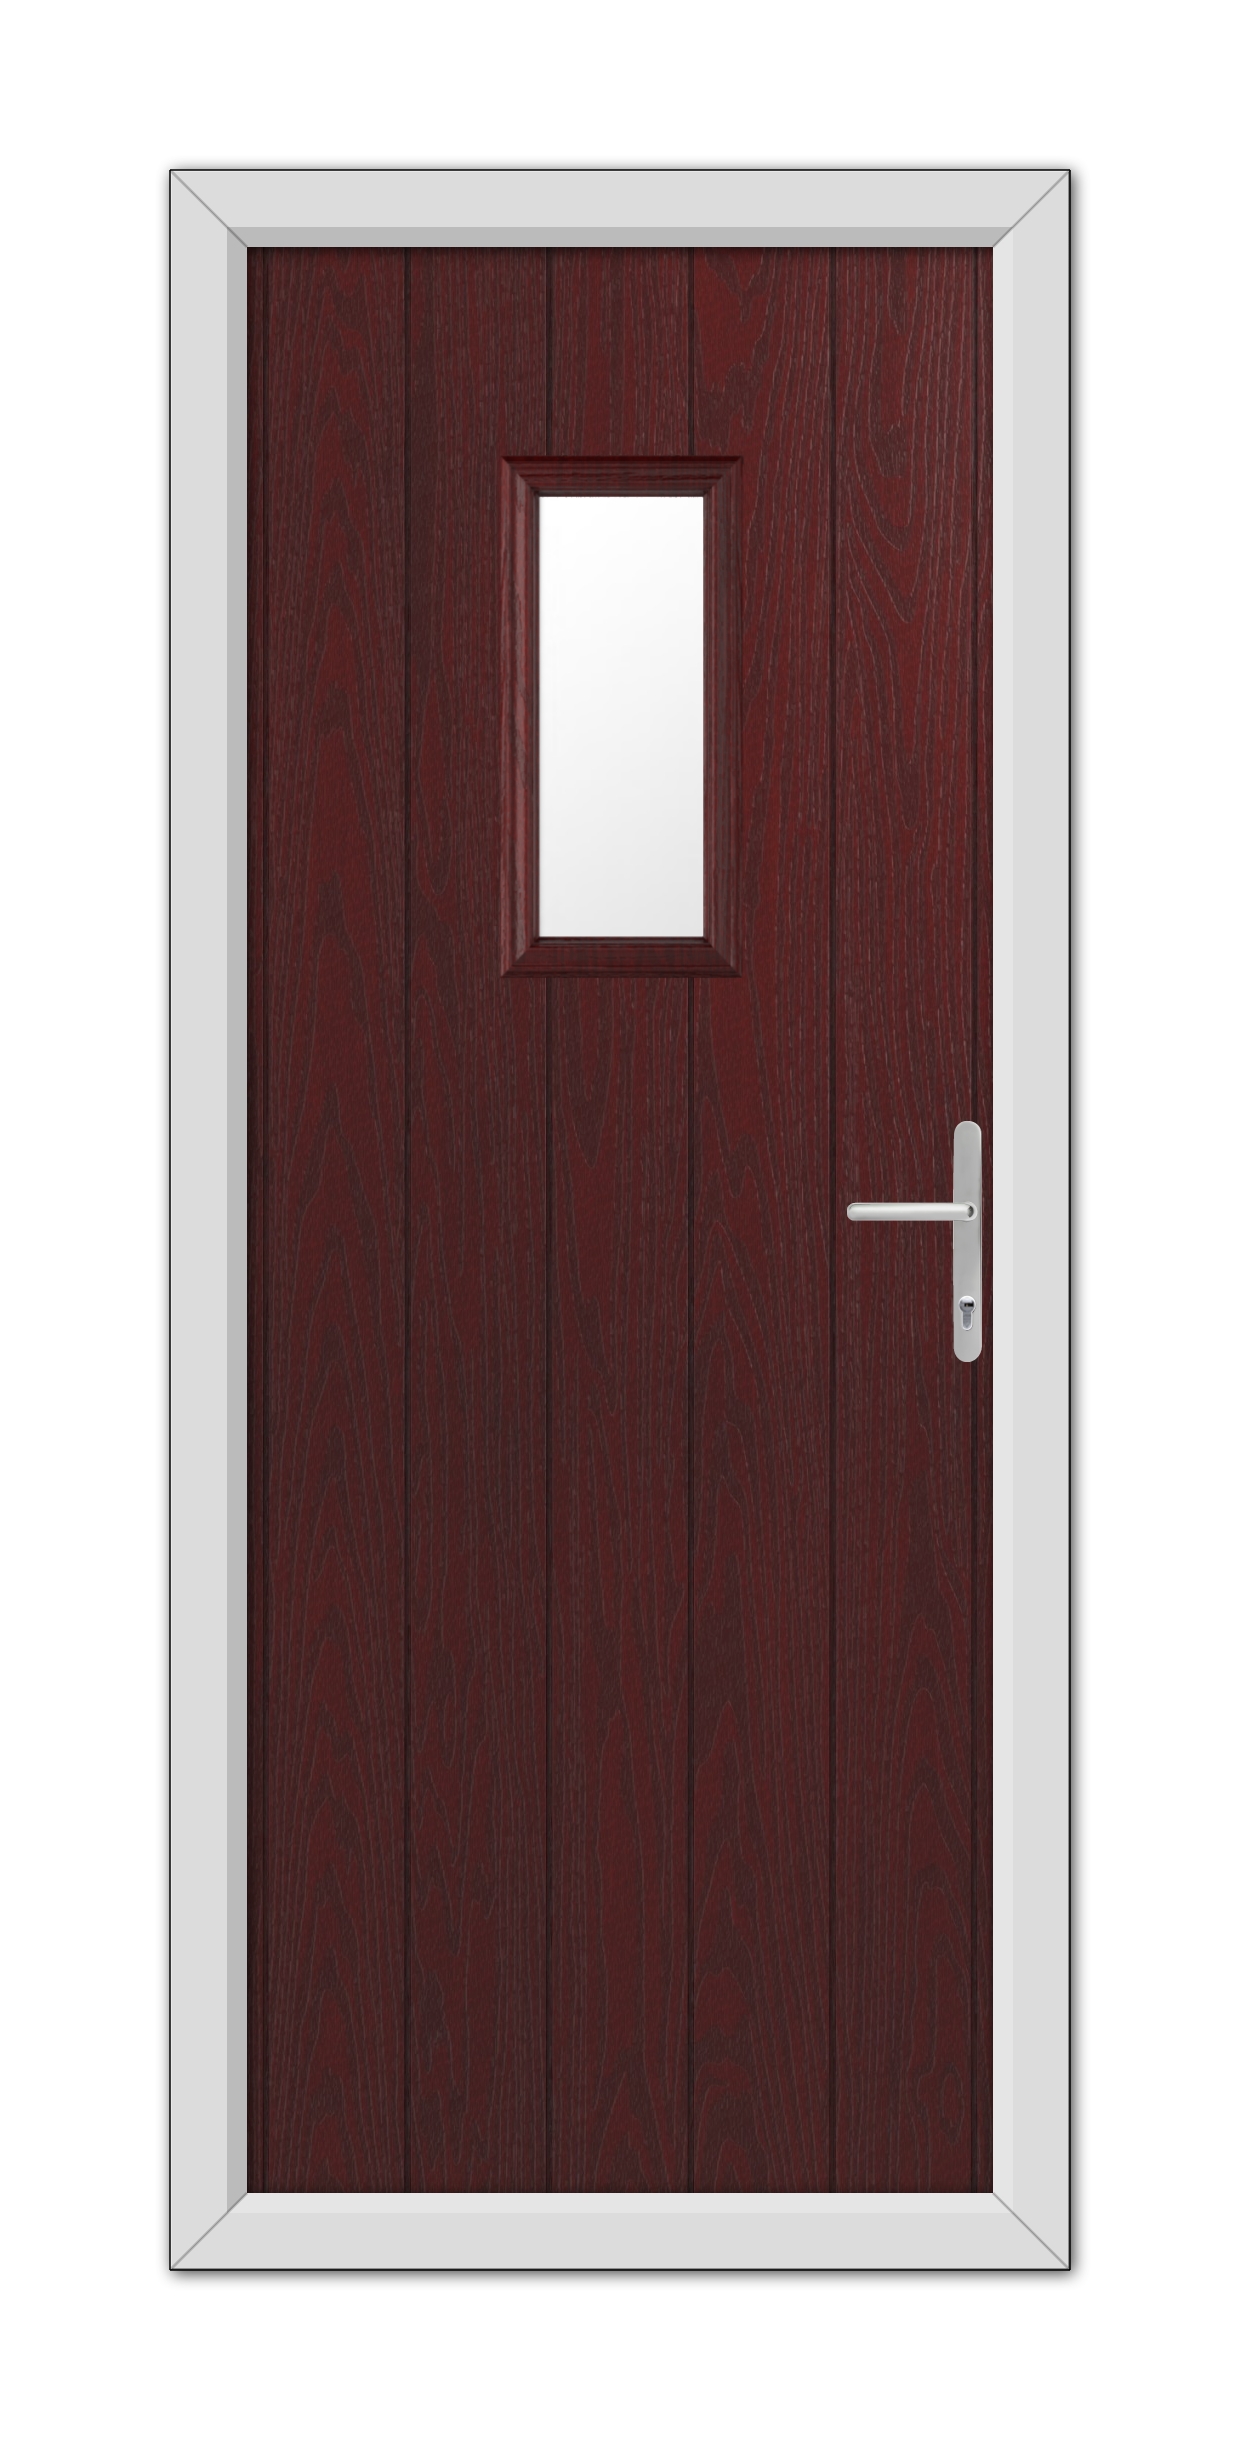 A Rosewood Somerset Composite Door 48mm Timber Core with a small square window, framed in white, and equipped with a contemporary silver handle.